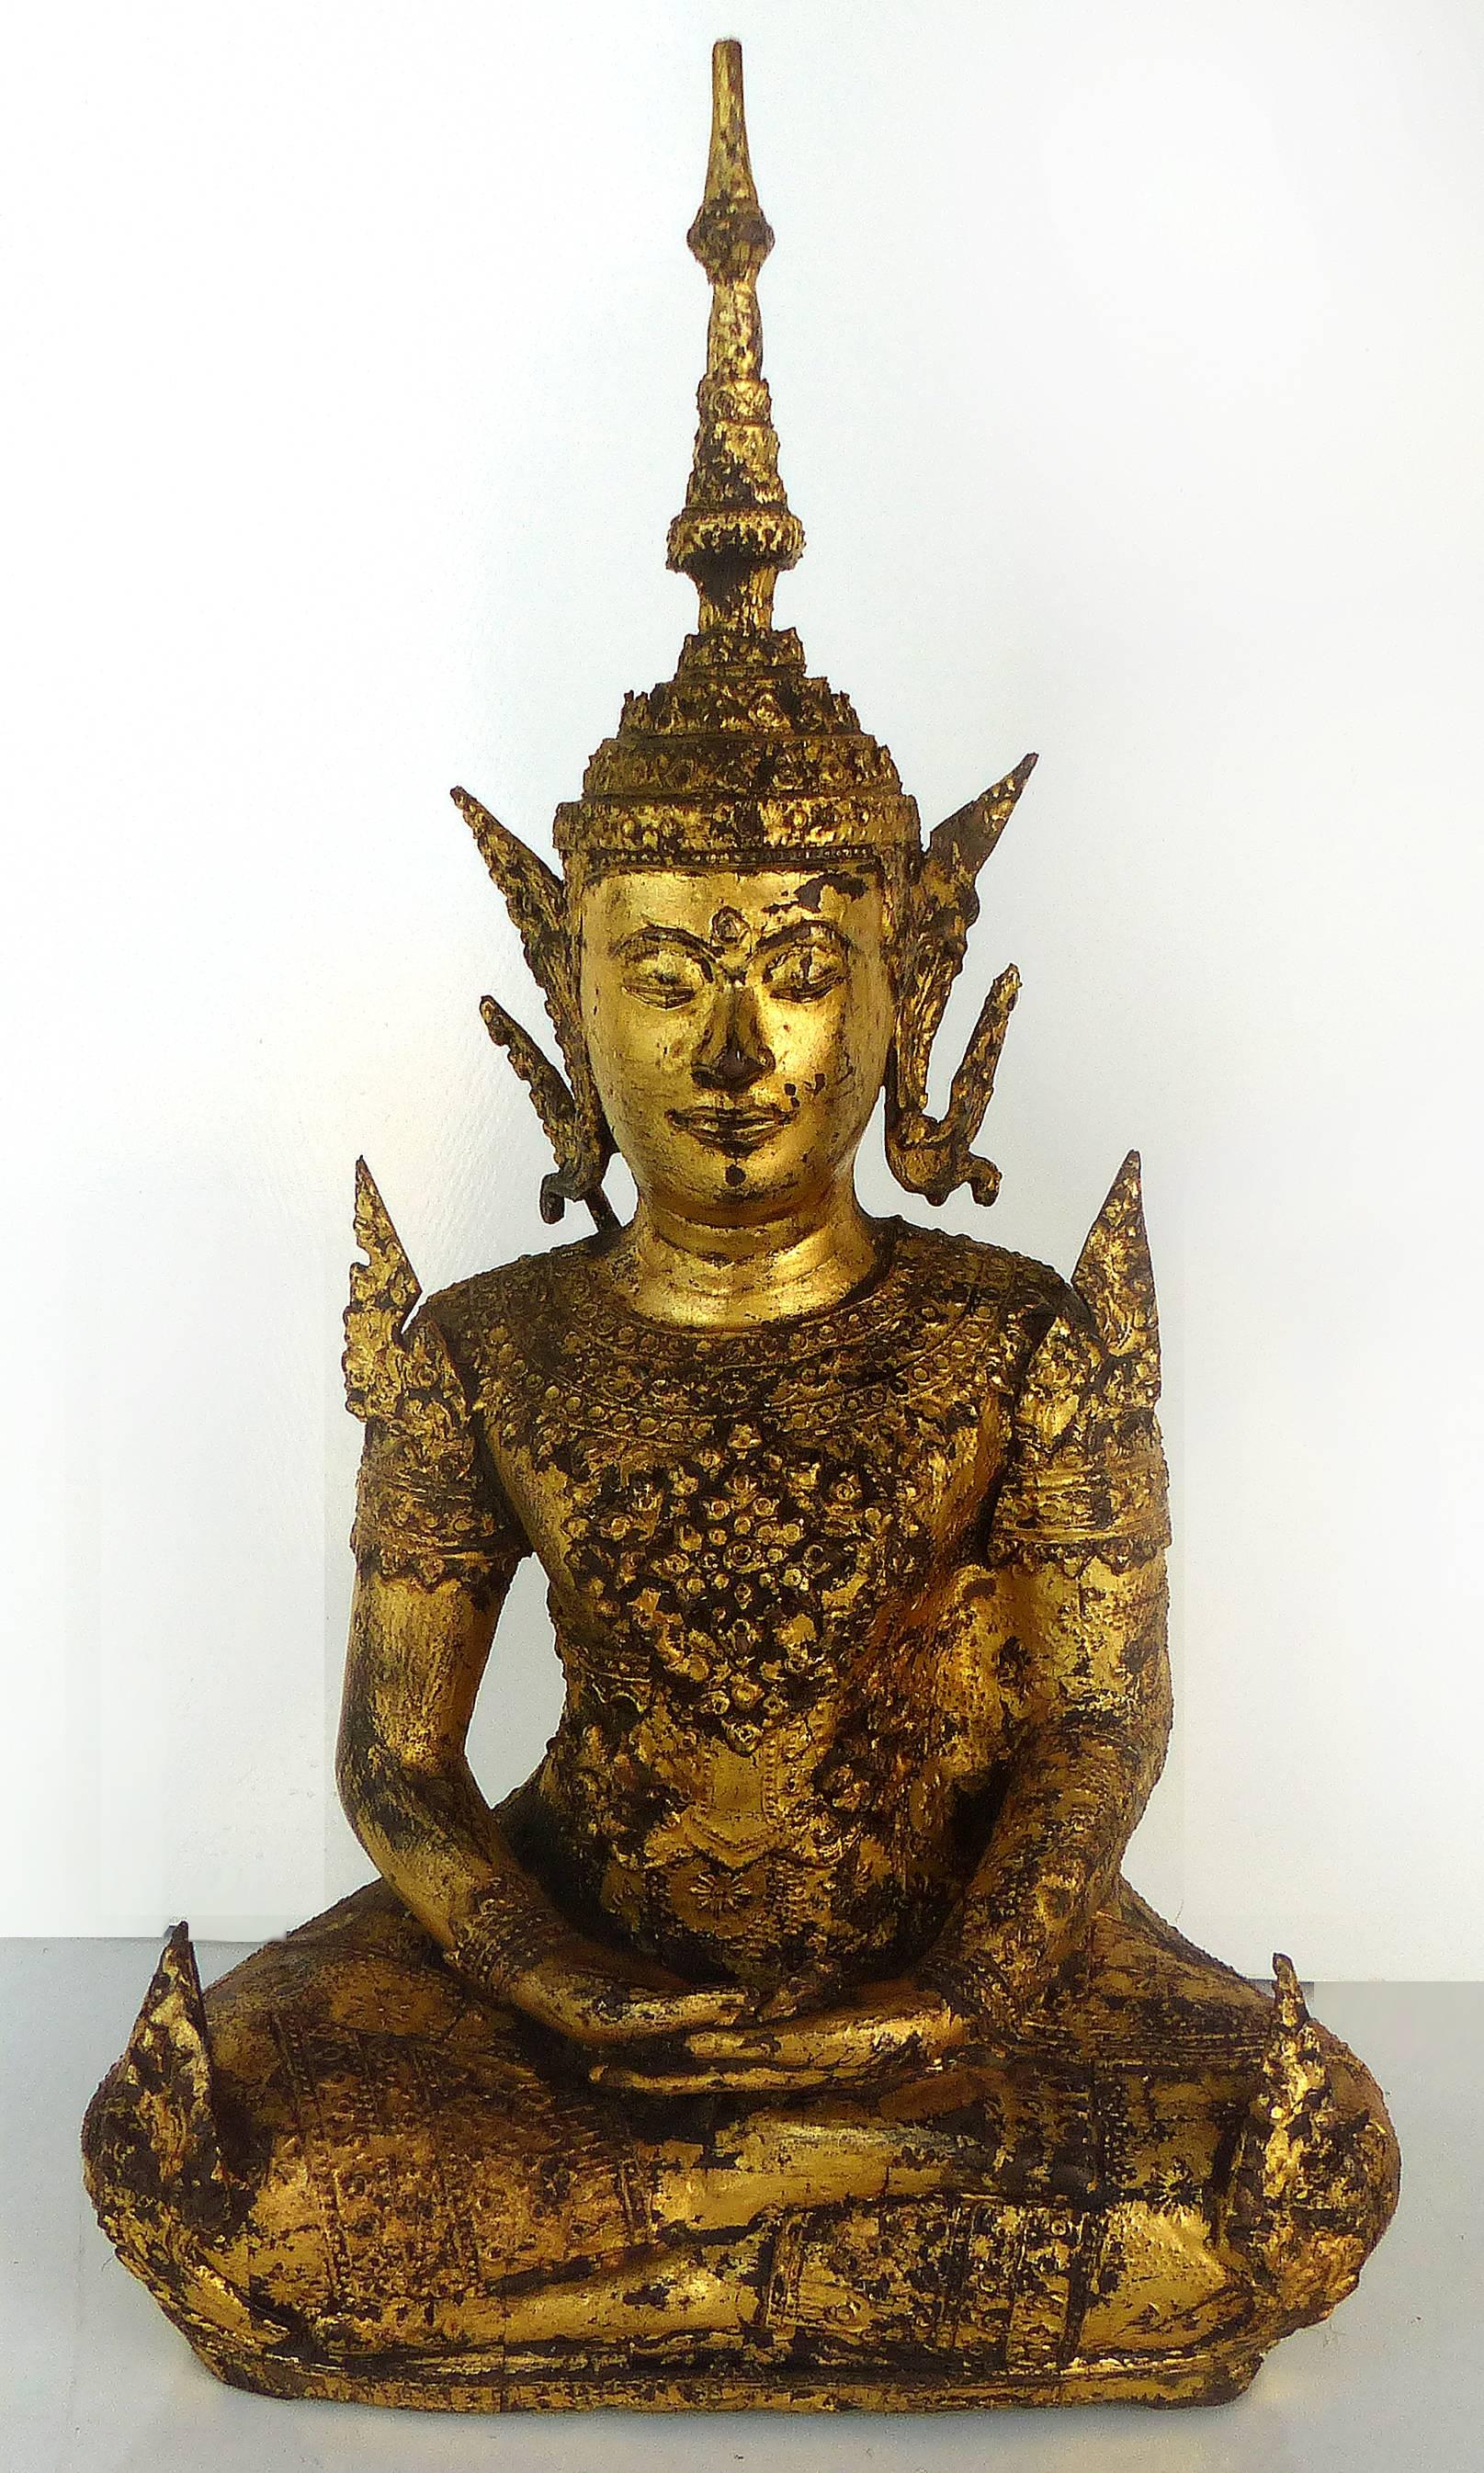 An antique bronze Buddha from Thailand with remnants of a gilt finish, circa late 19th century into early the 20th century, the Buddha is seated upon a modern fitted mahogany base.